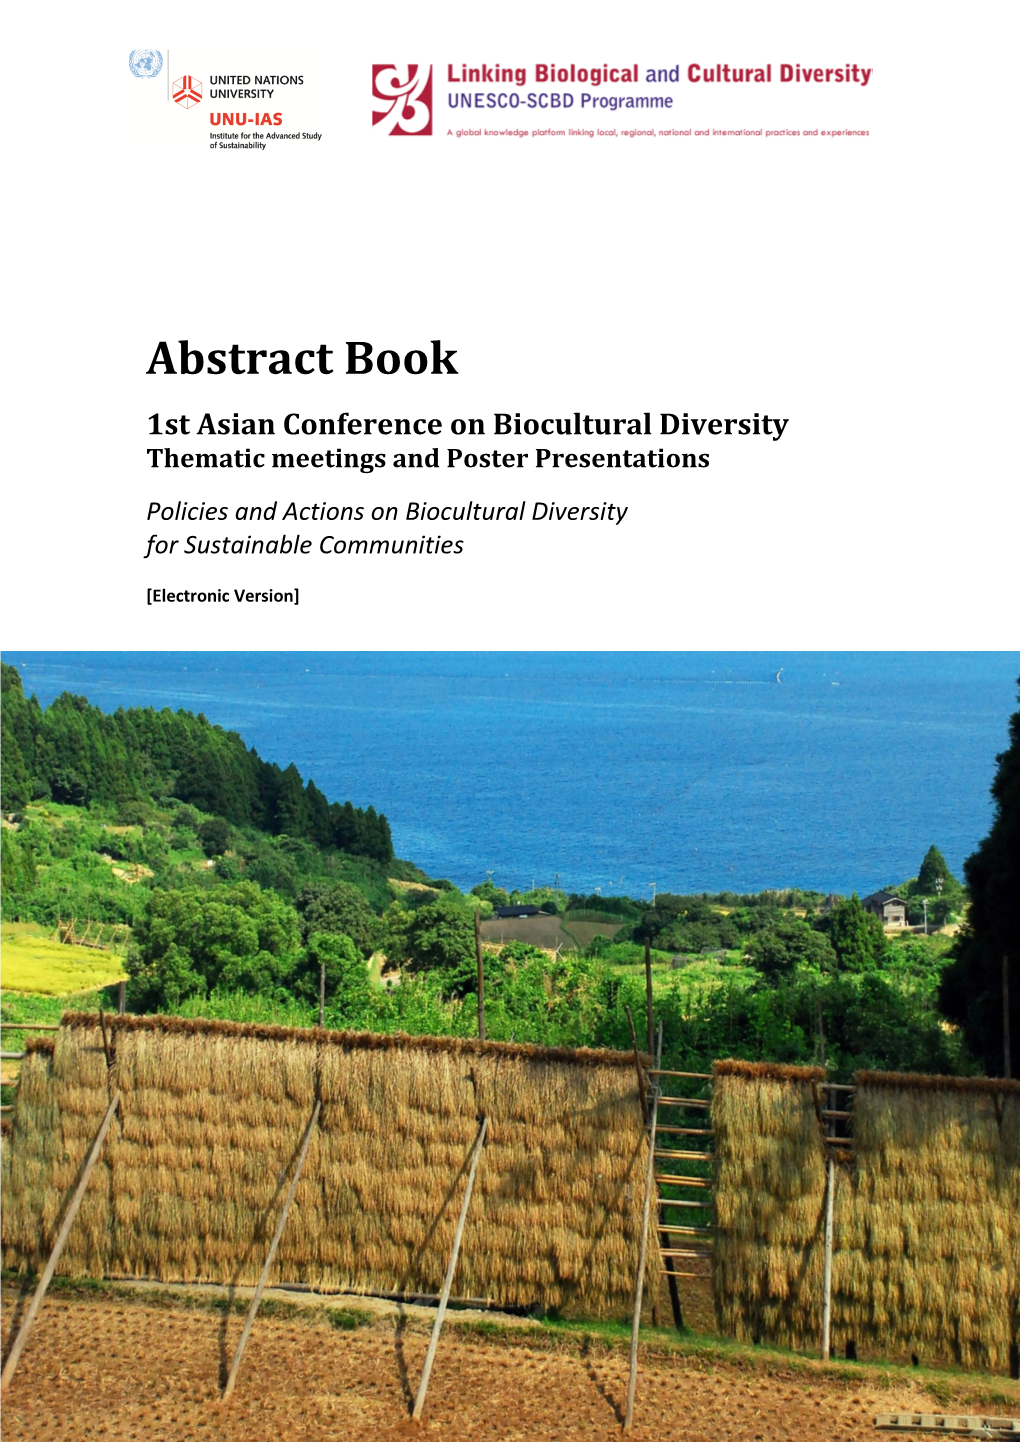 Abstract Book of 1St Asian Conference on Biocultural Diversity Thematic